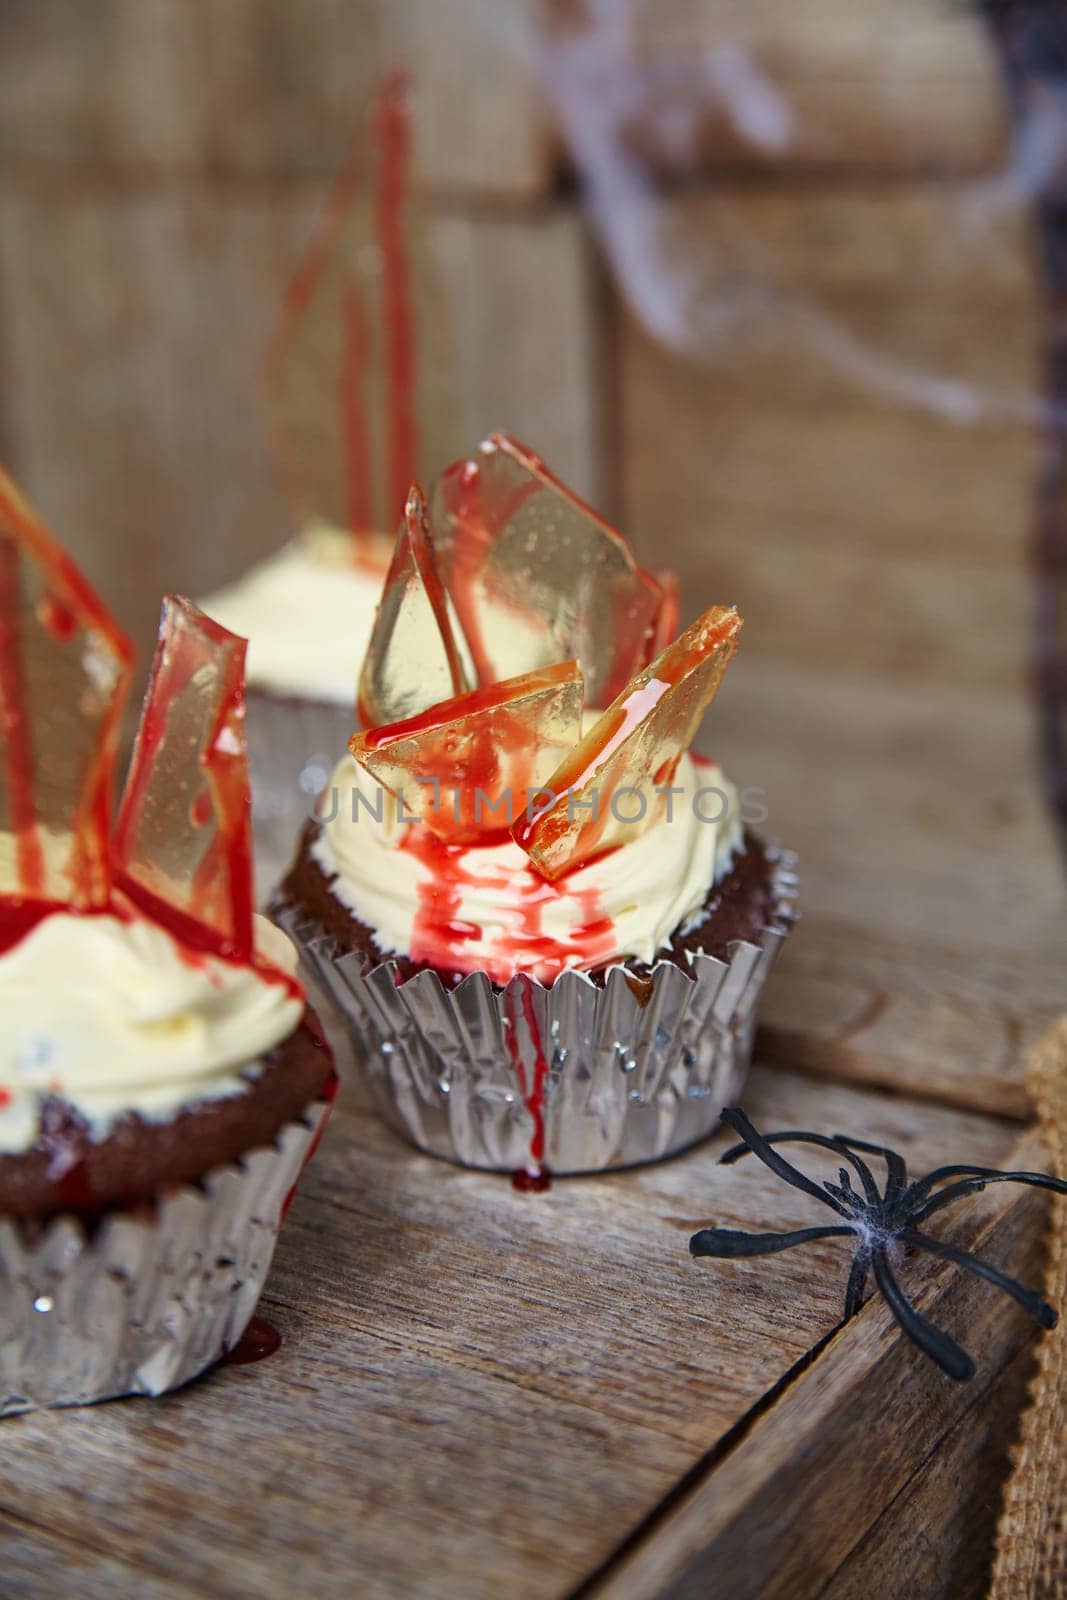 Gory Halloween Cupcakes on Rustic Wood with Spider Accent by njproductions